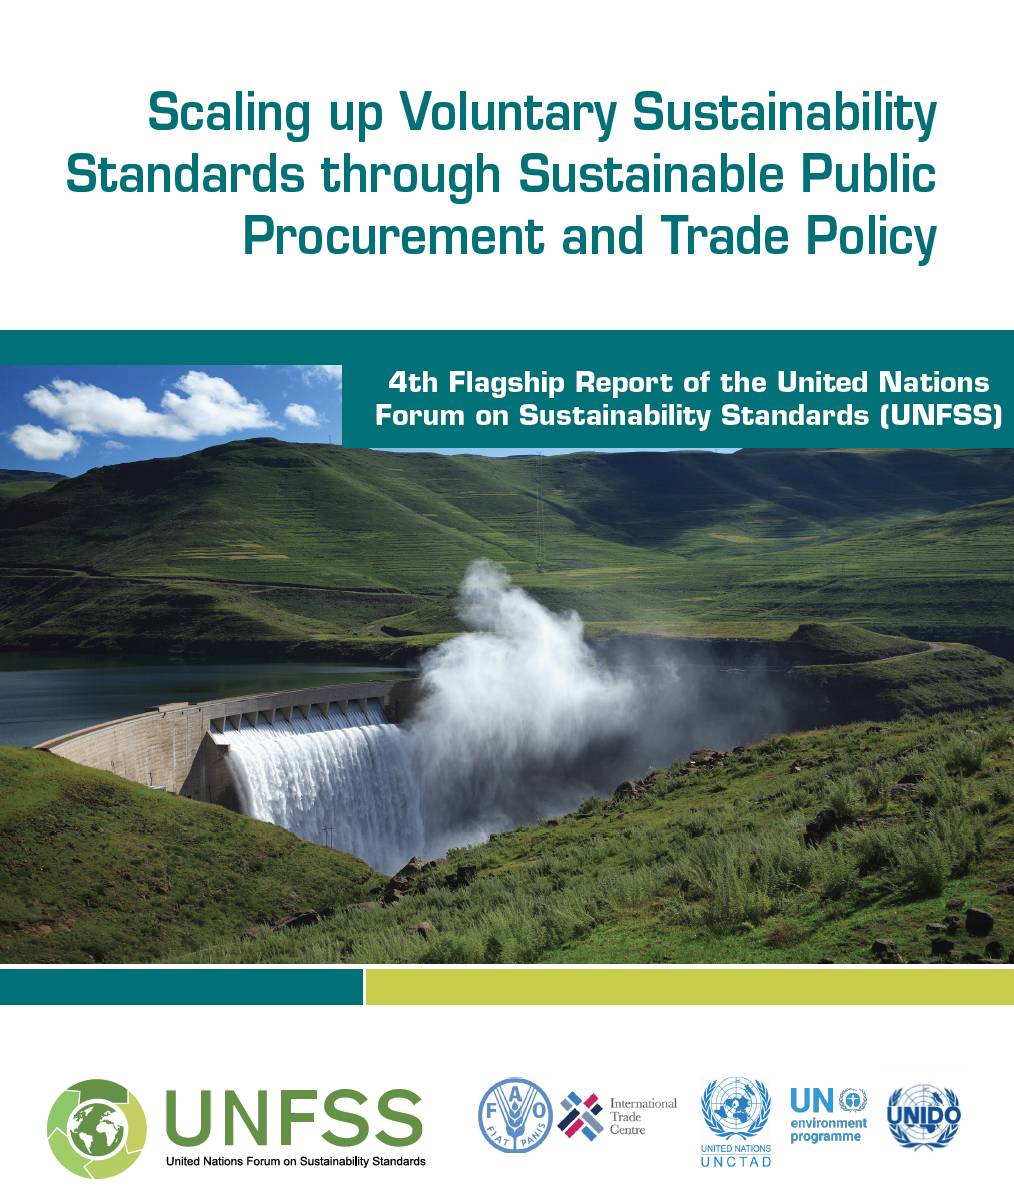 Scaling up Voluntary Sustainability Standards through Sustainable Public Procurement and Trade Policy